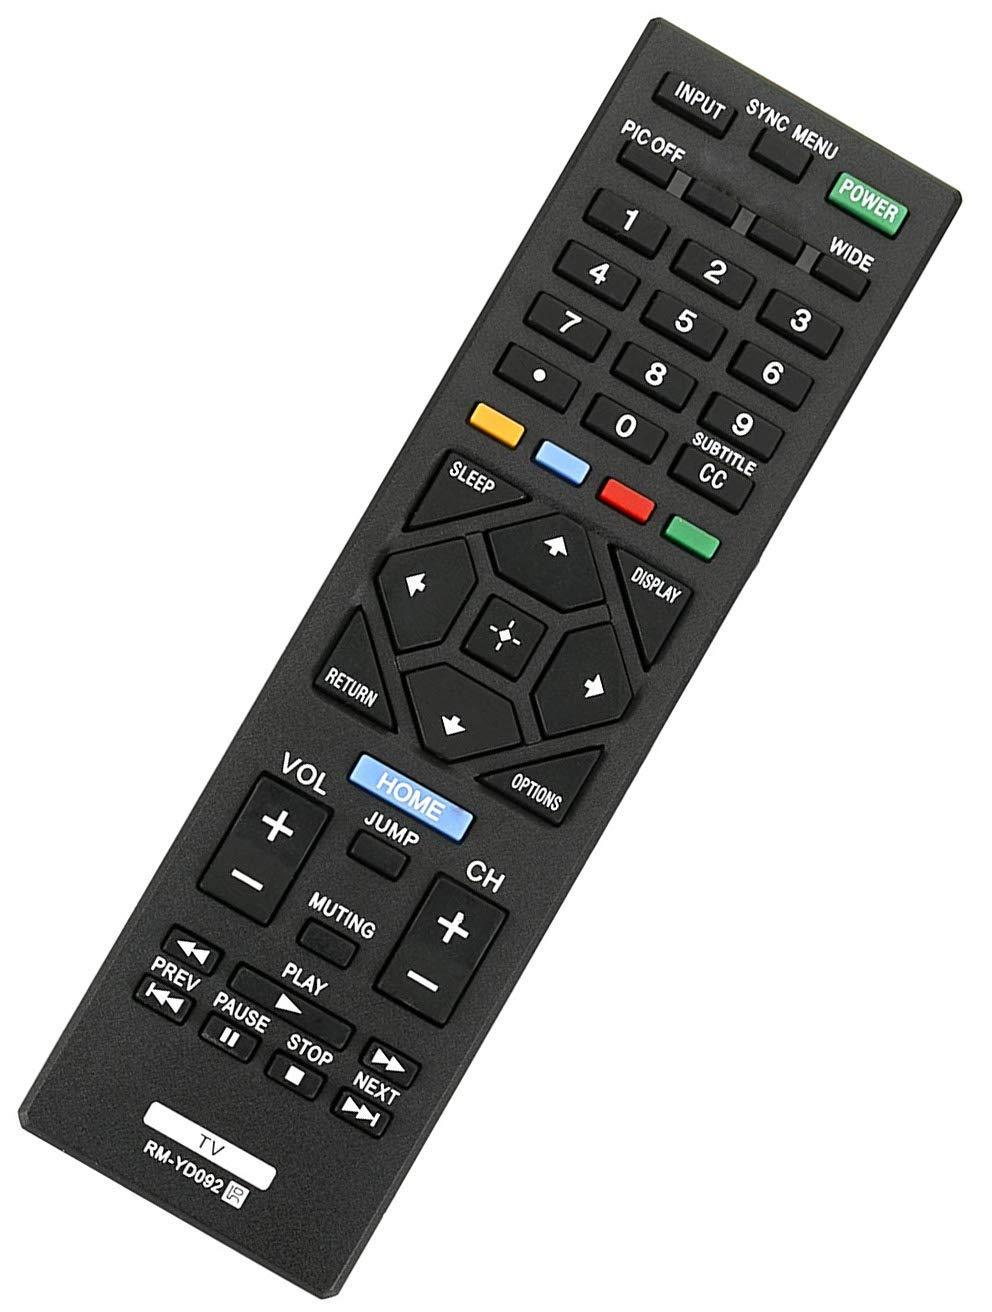 RM-YD092 Remote Control Compatible with Sony LED HDTV KDL-32R300B KDL-32R300C KDL-32R330B KDL-32R420B KDL-32R421A KDL-46R450A KDL-46R453A KDL-46R471A KDL-48R470B KDL-50R450 KDL-50R450A - LeoForward Australia